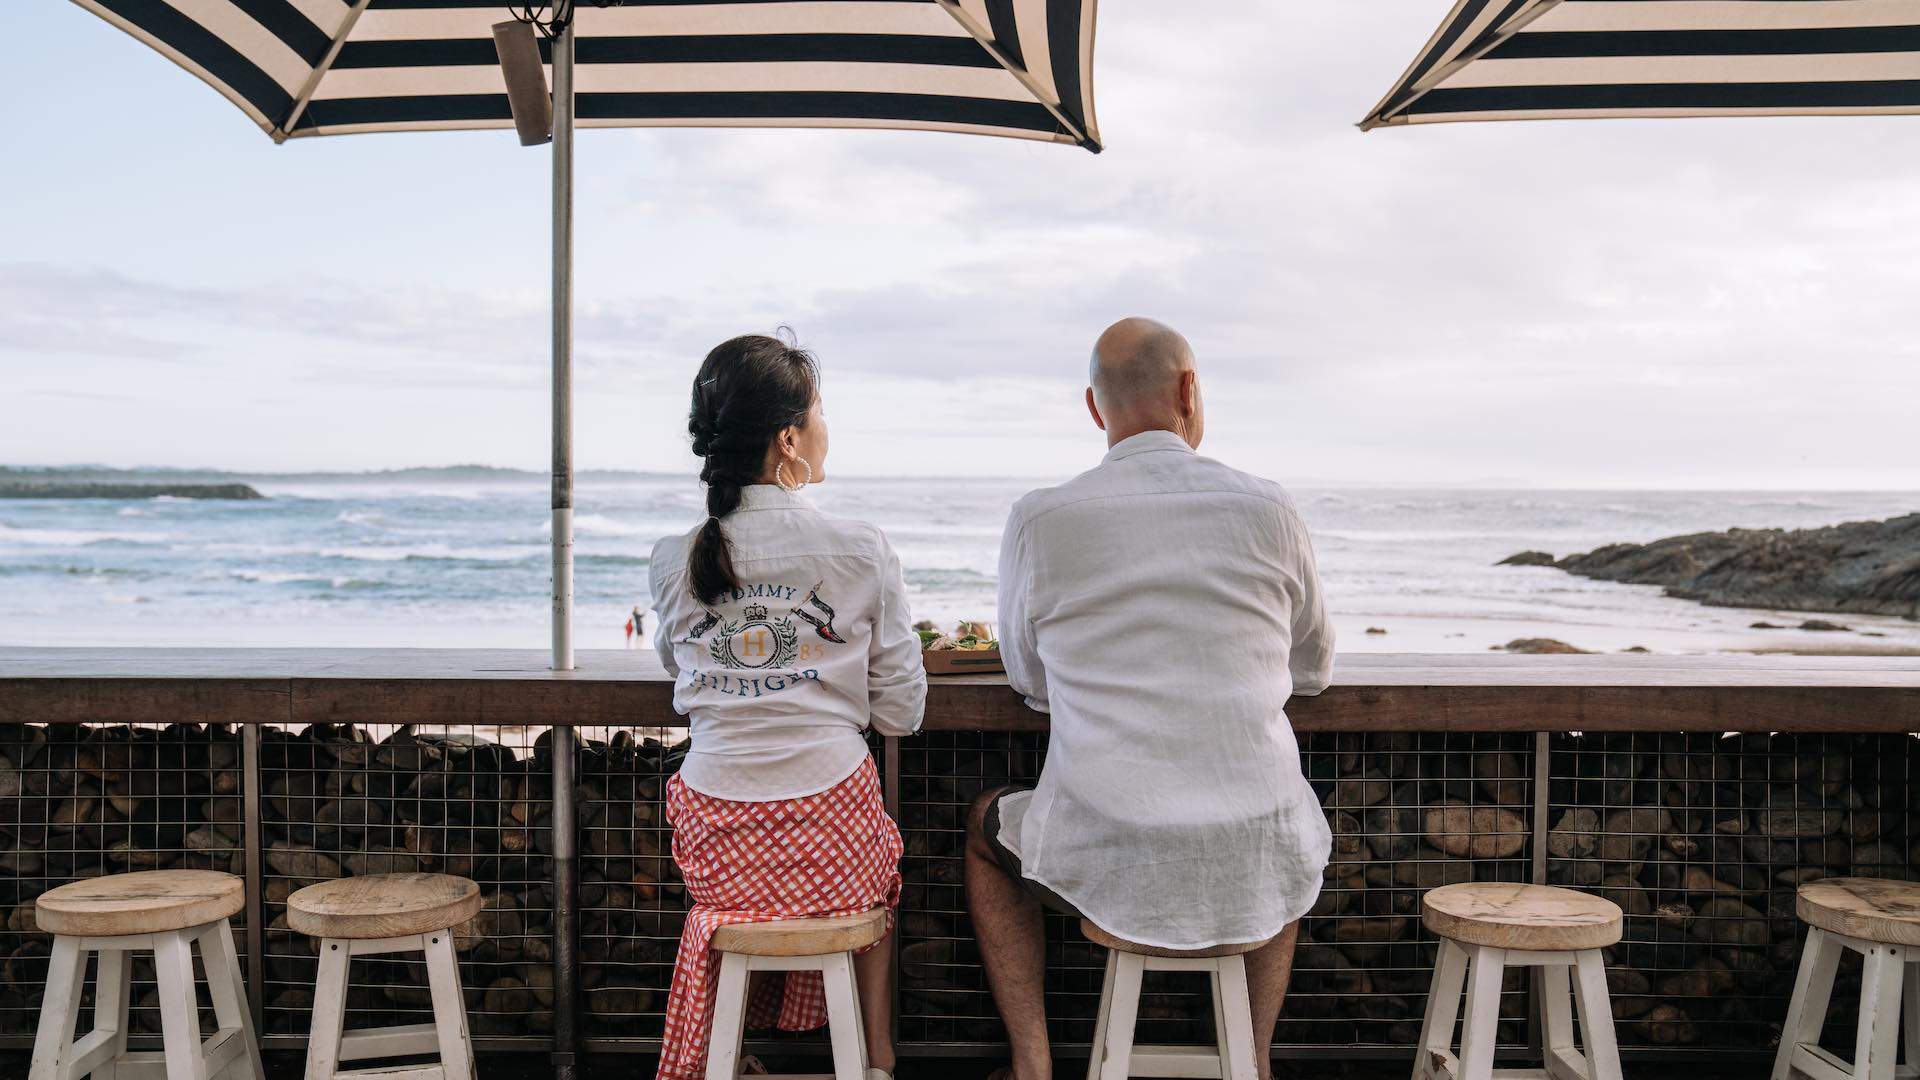 Save Your Annual Leave: Plan a Remote Work Escape to Port Macquarie Instead